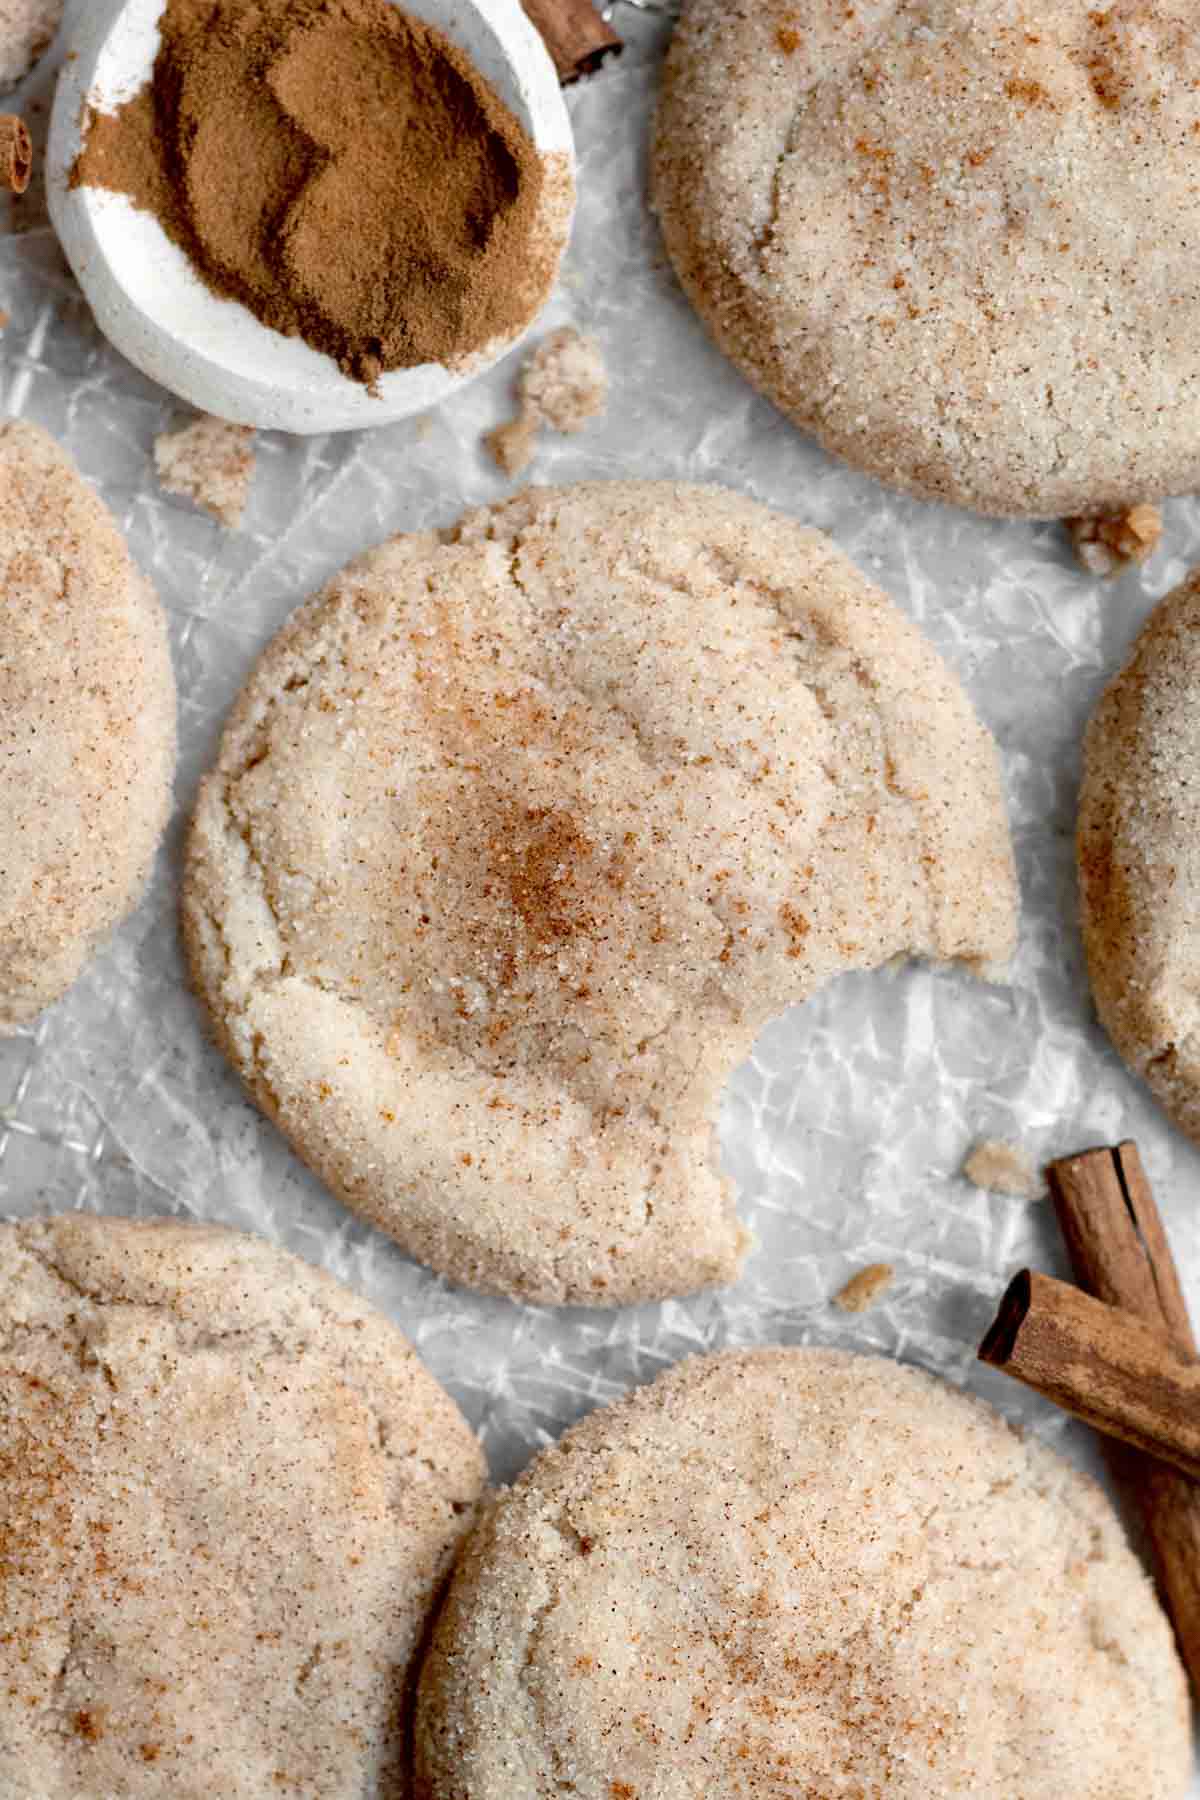 A delicious Gluten Free Snickerdoodle covered in cinnamon sugar with a bite taken out.